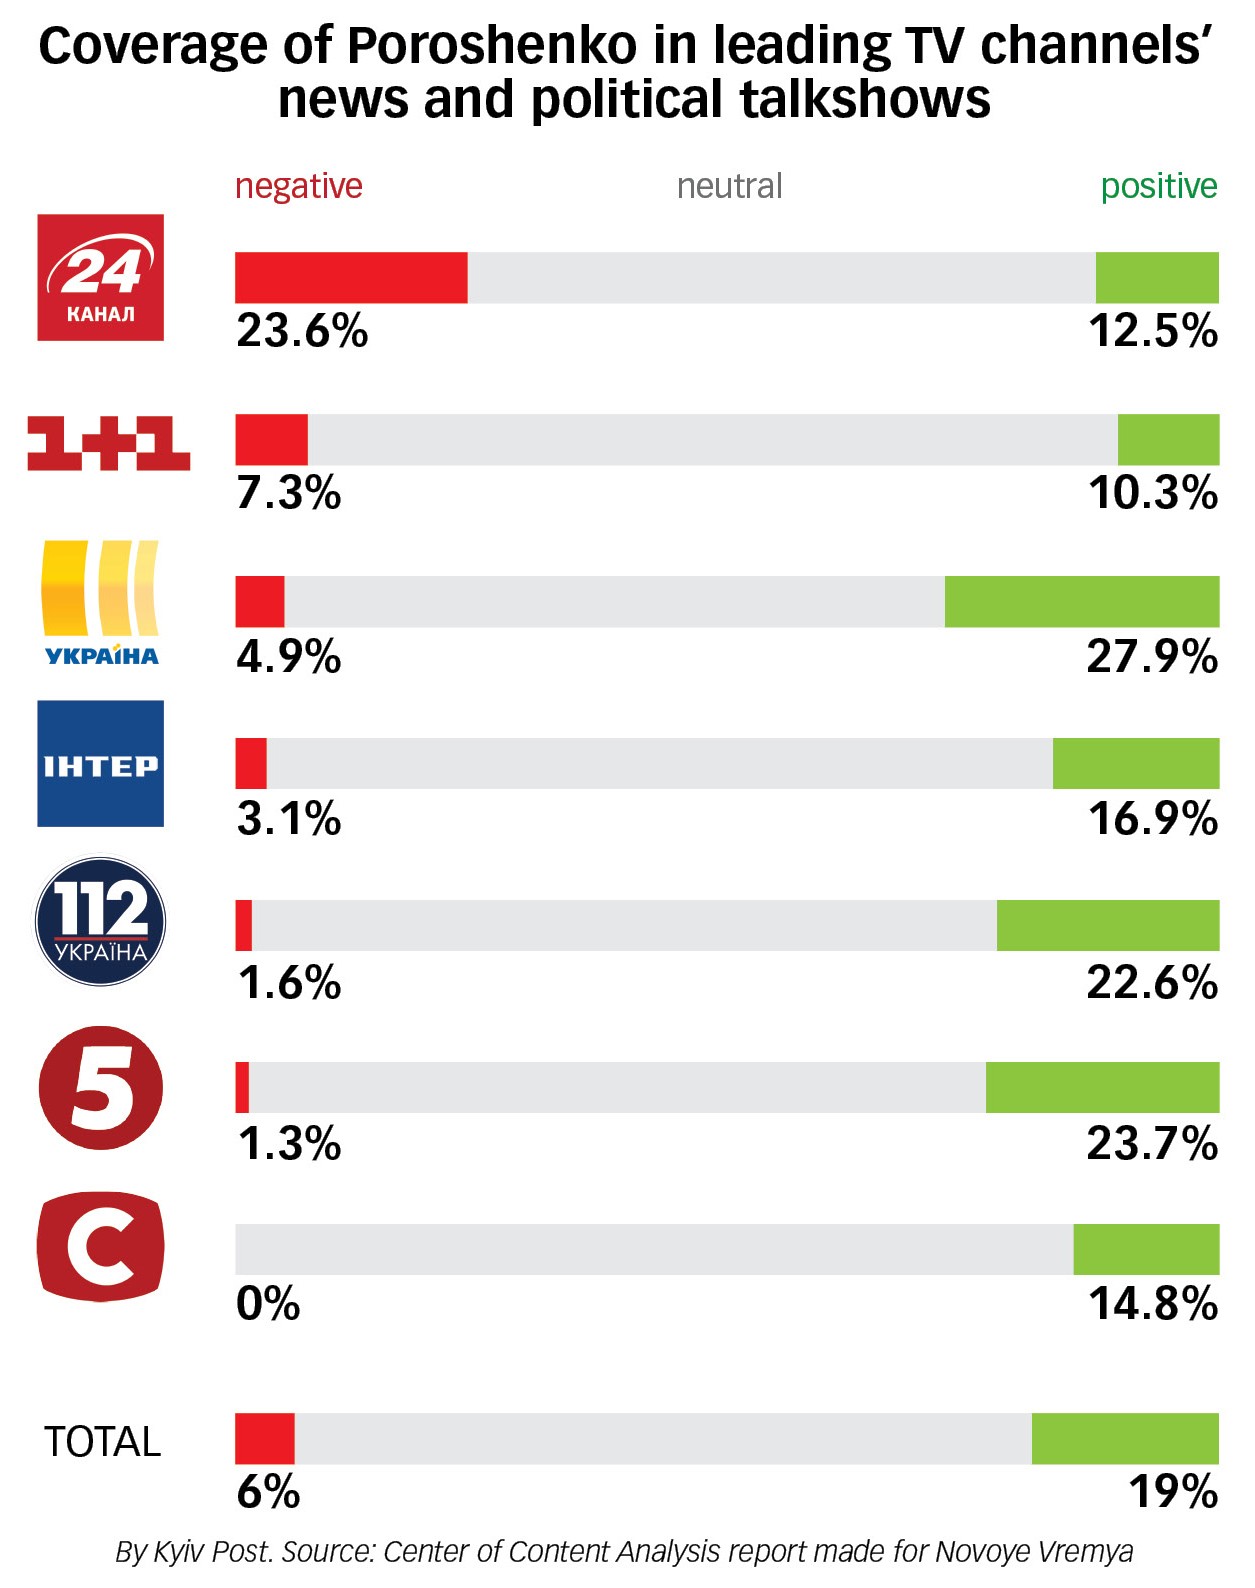 President Petro Poroshenko enjoys overwhelmingly positive or neutral coverage on the biggest television channels, including no negative news on STB, part of what critics see as shady deals with owners of the TV channels.